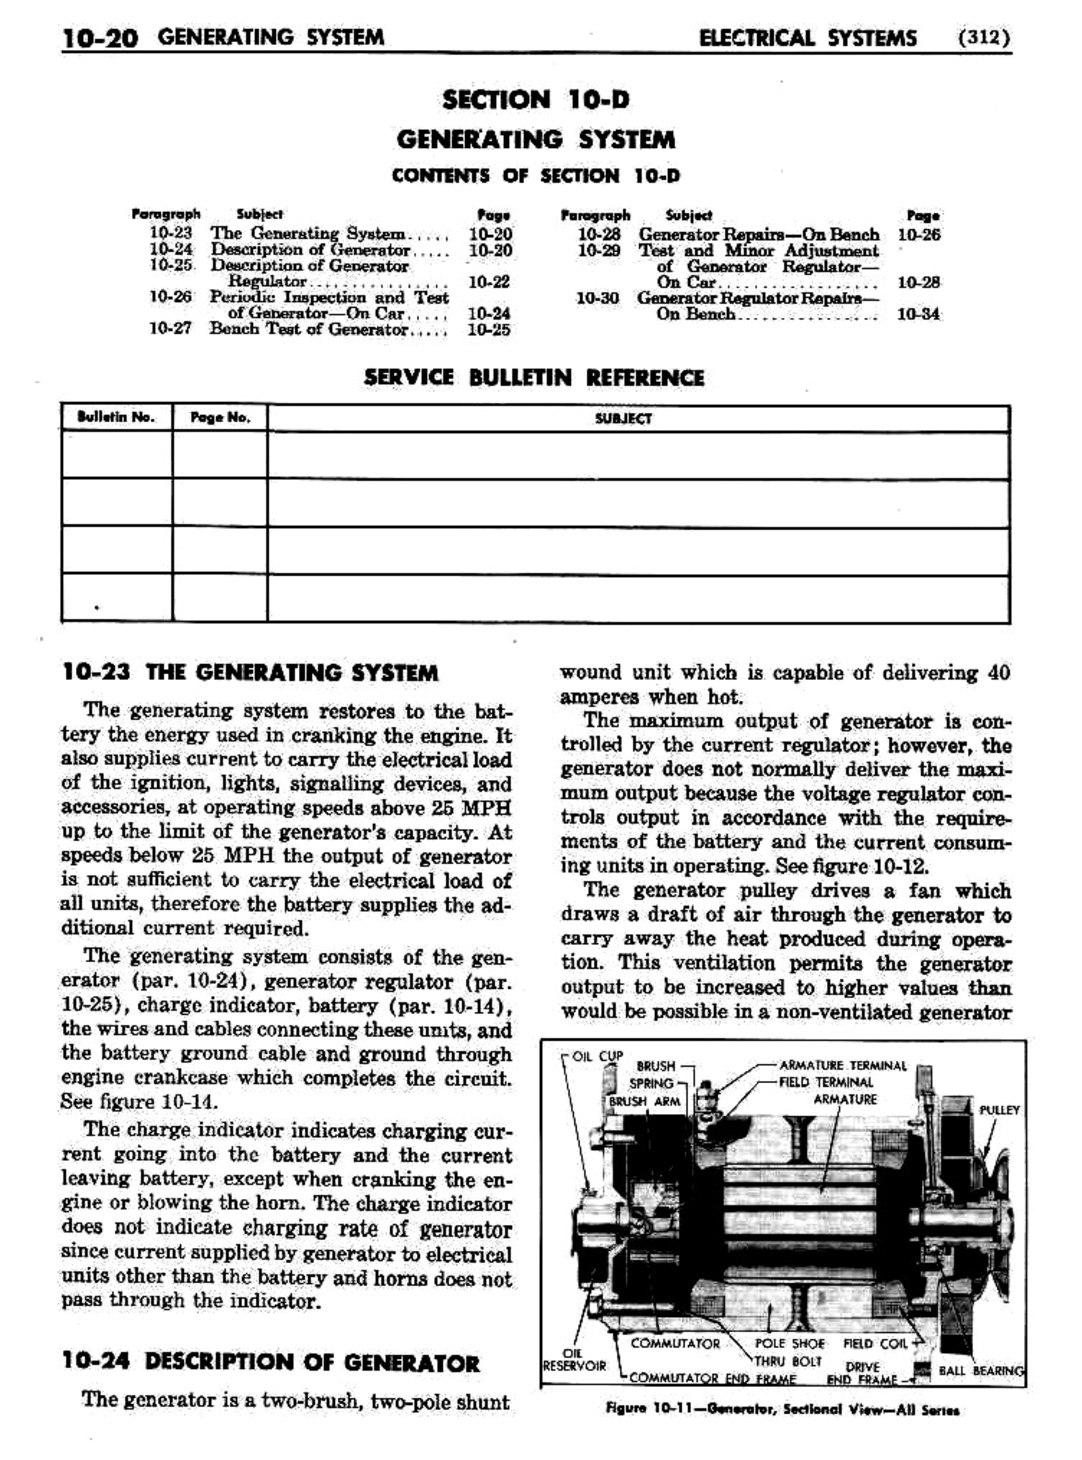 n_11 1951 Buick Shop Manual - Electrical Systems-020-020.jpg